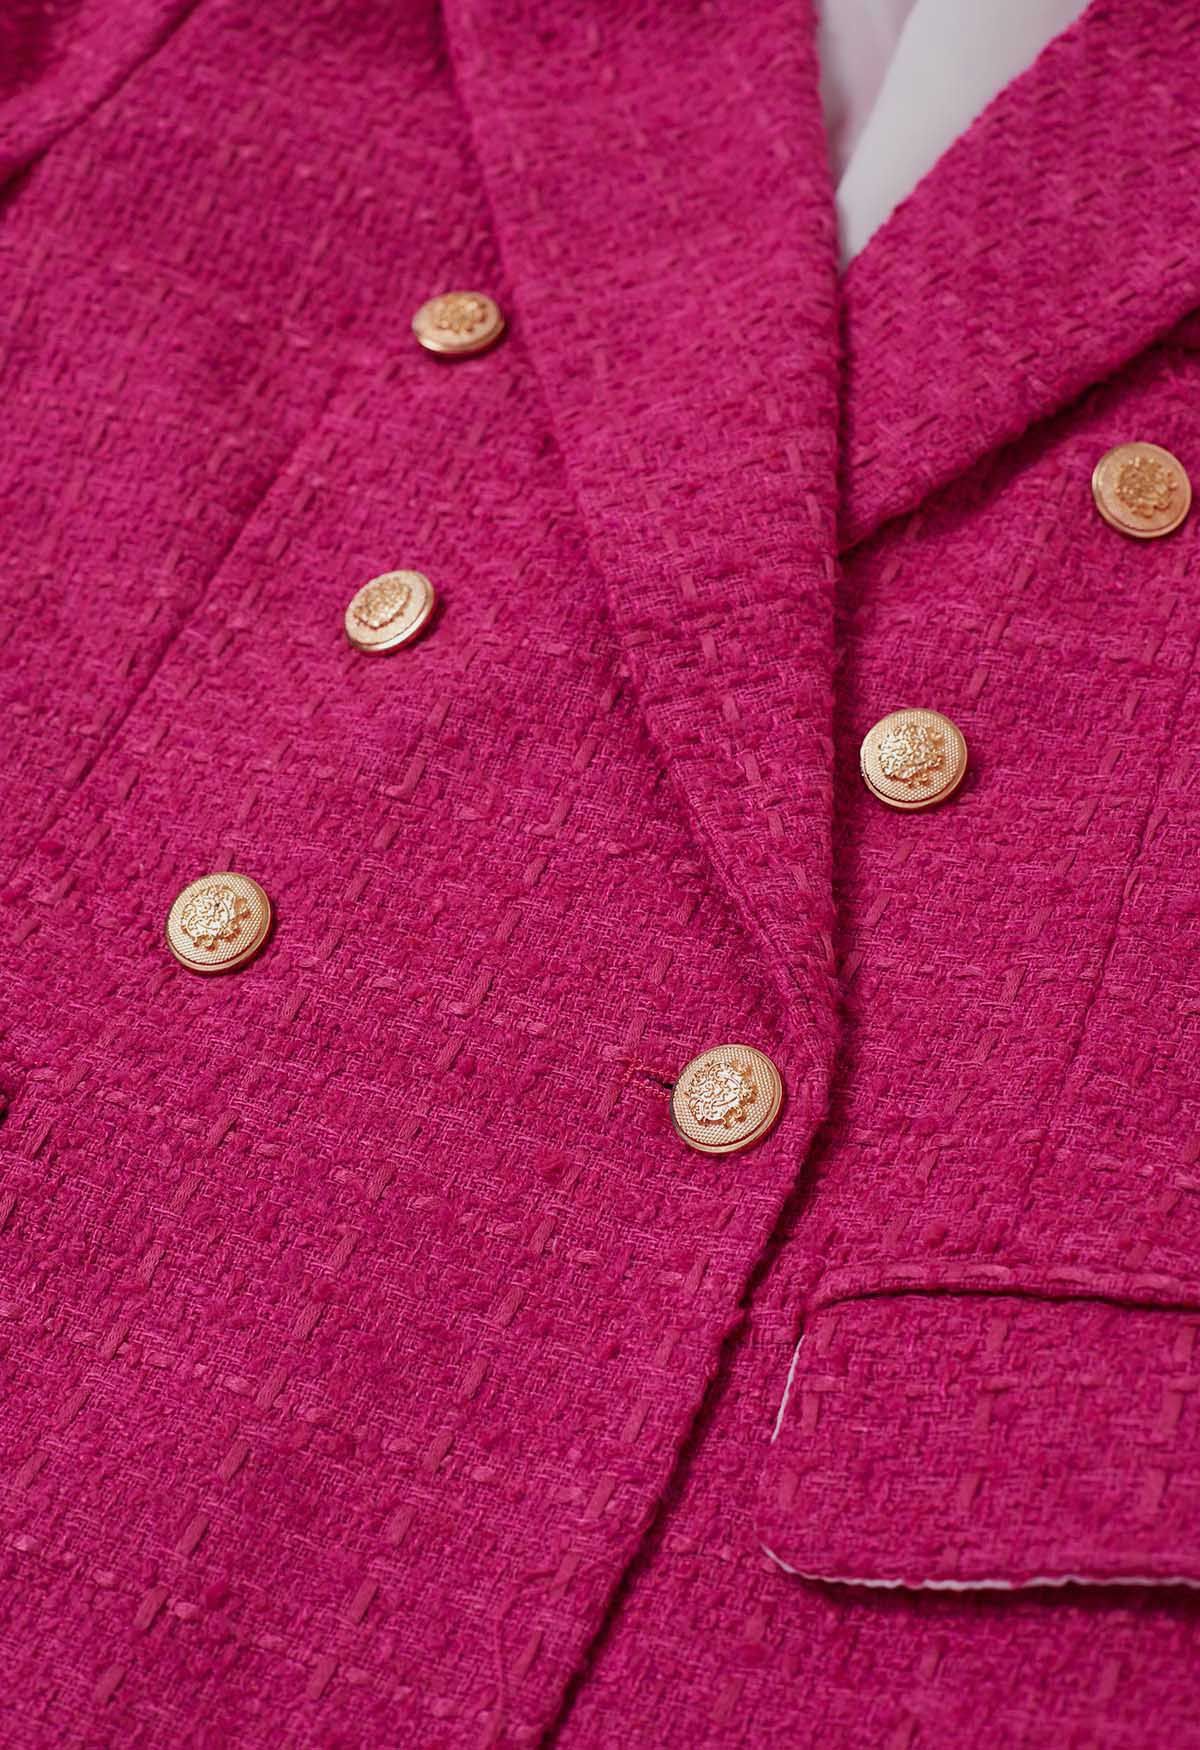 Check Tweed Double-Breasted Blazer in Hot Pink